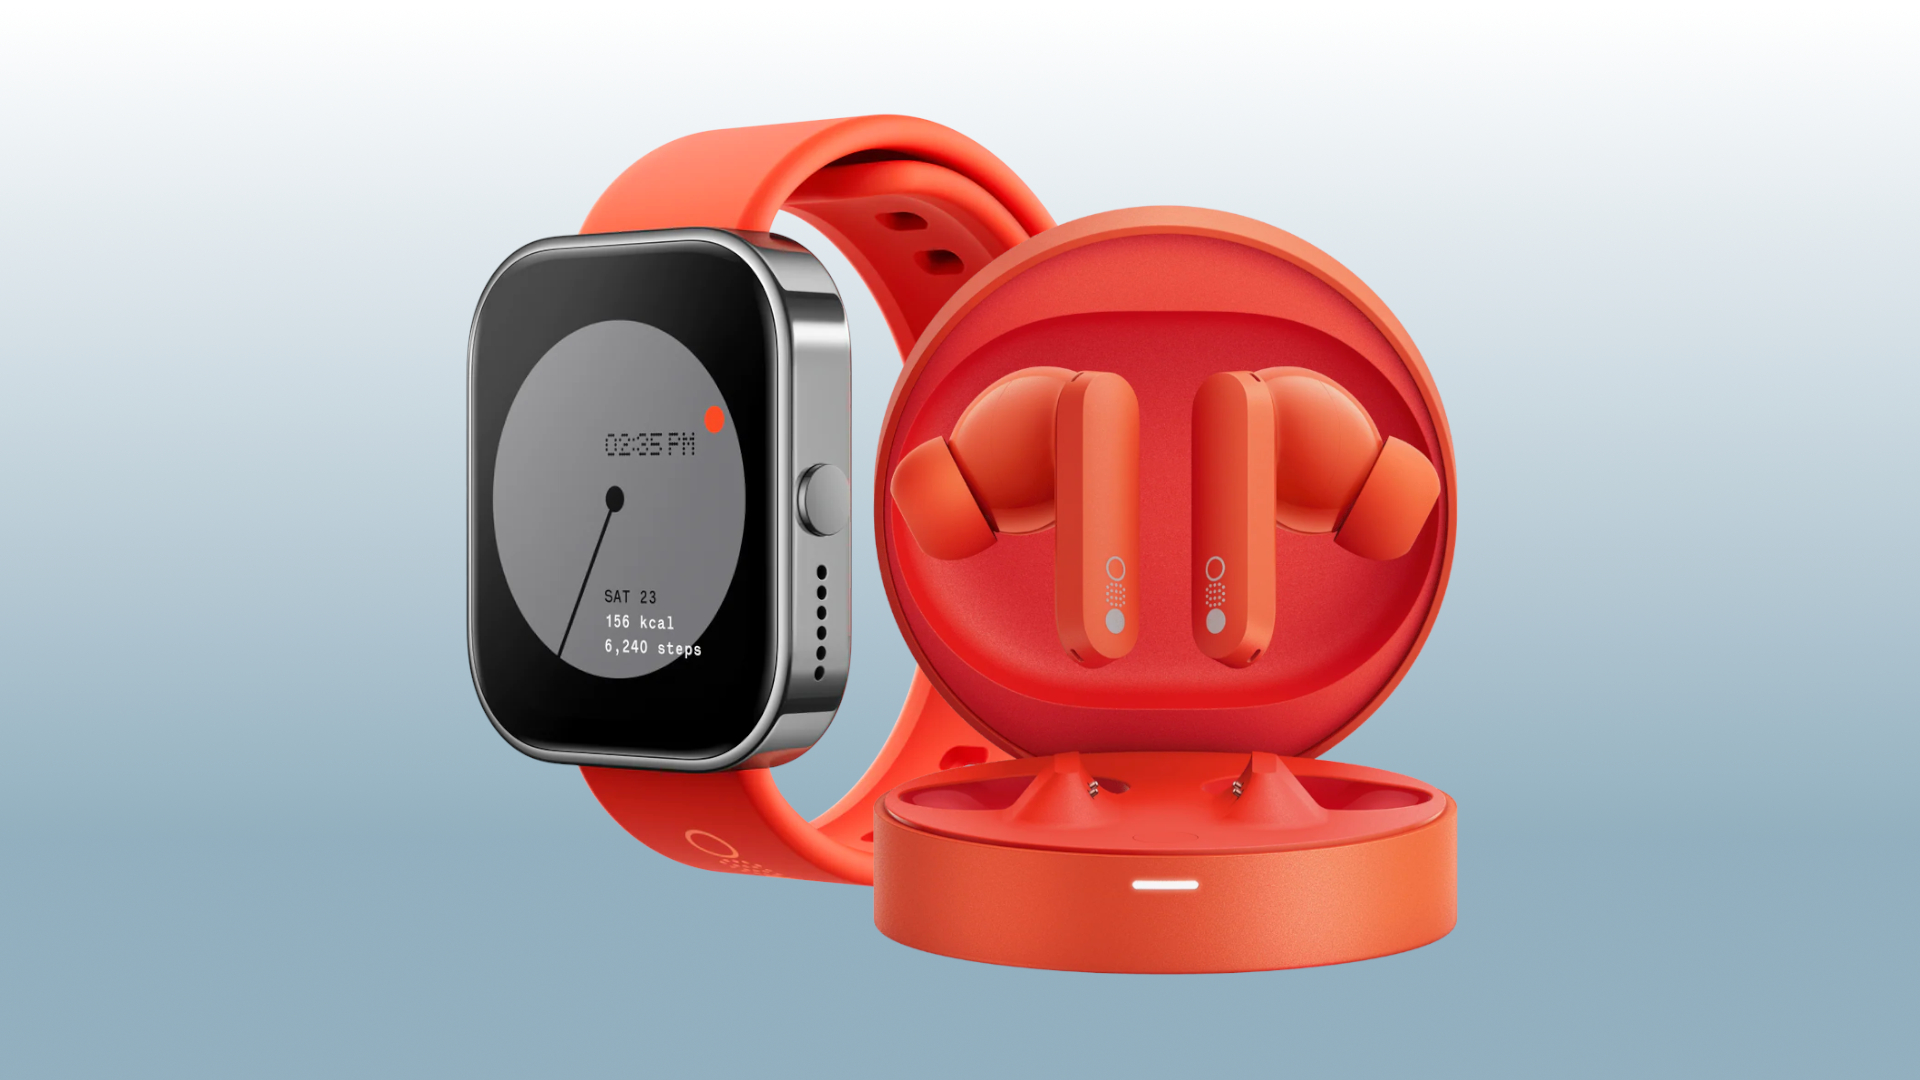 VEKIN Bluetooth headset with Touch SmartWatch Smartwatch Price in India -  Buy VEKIN Bluetooth headset with Touch SmartWatch Smartwatch online at  Flipkart.com